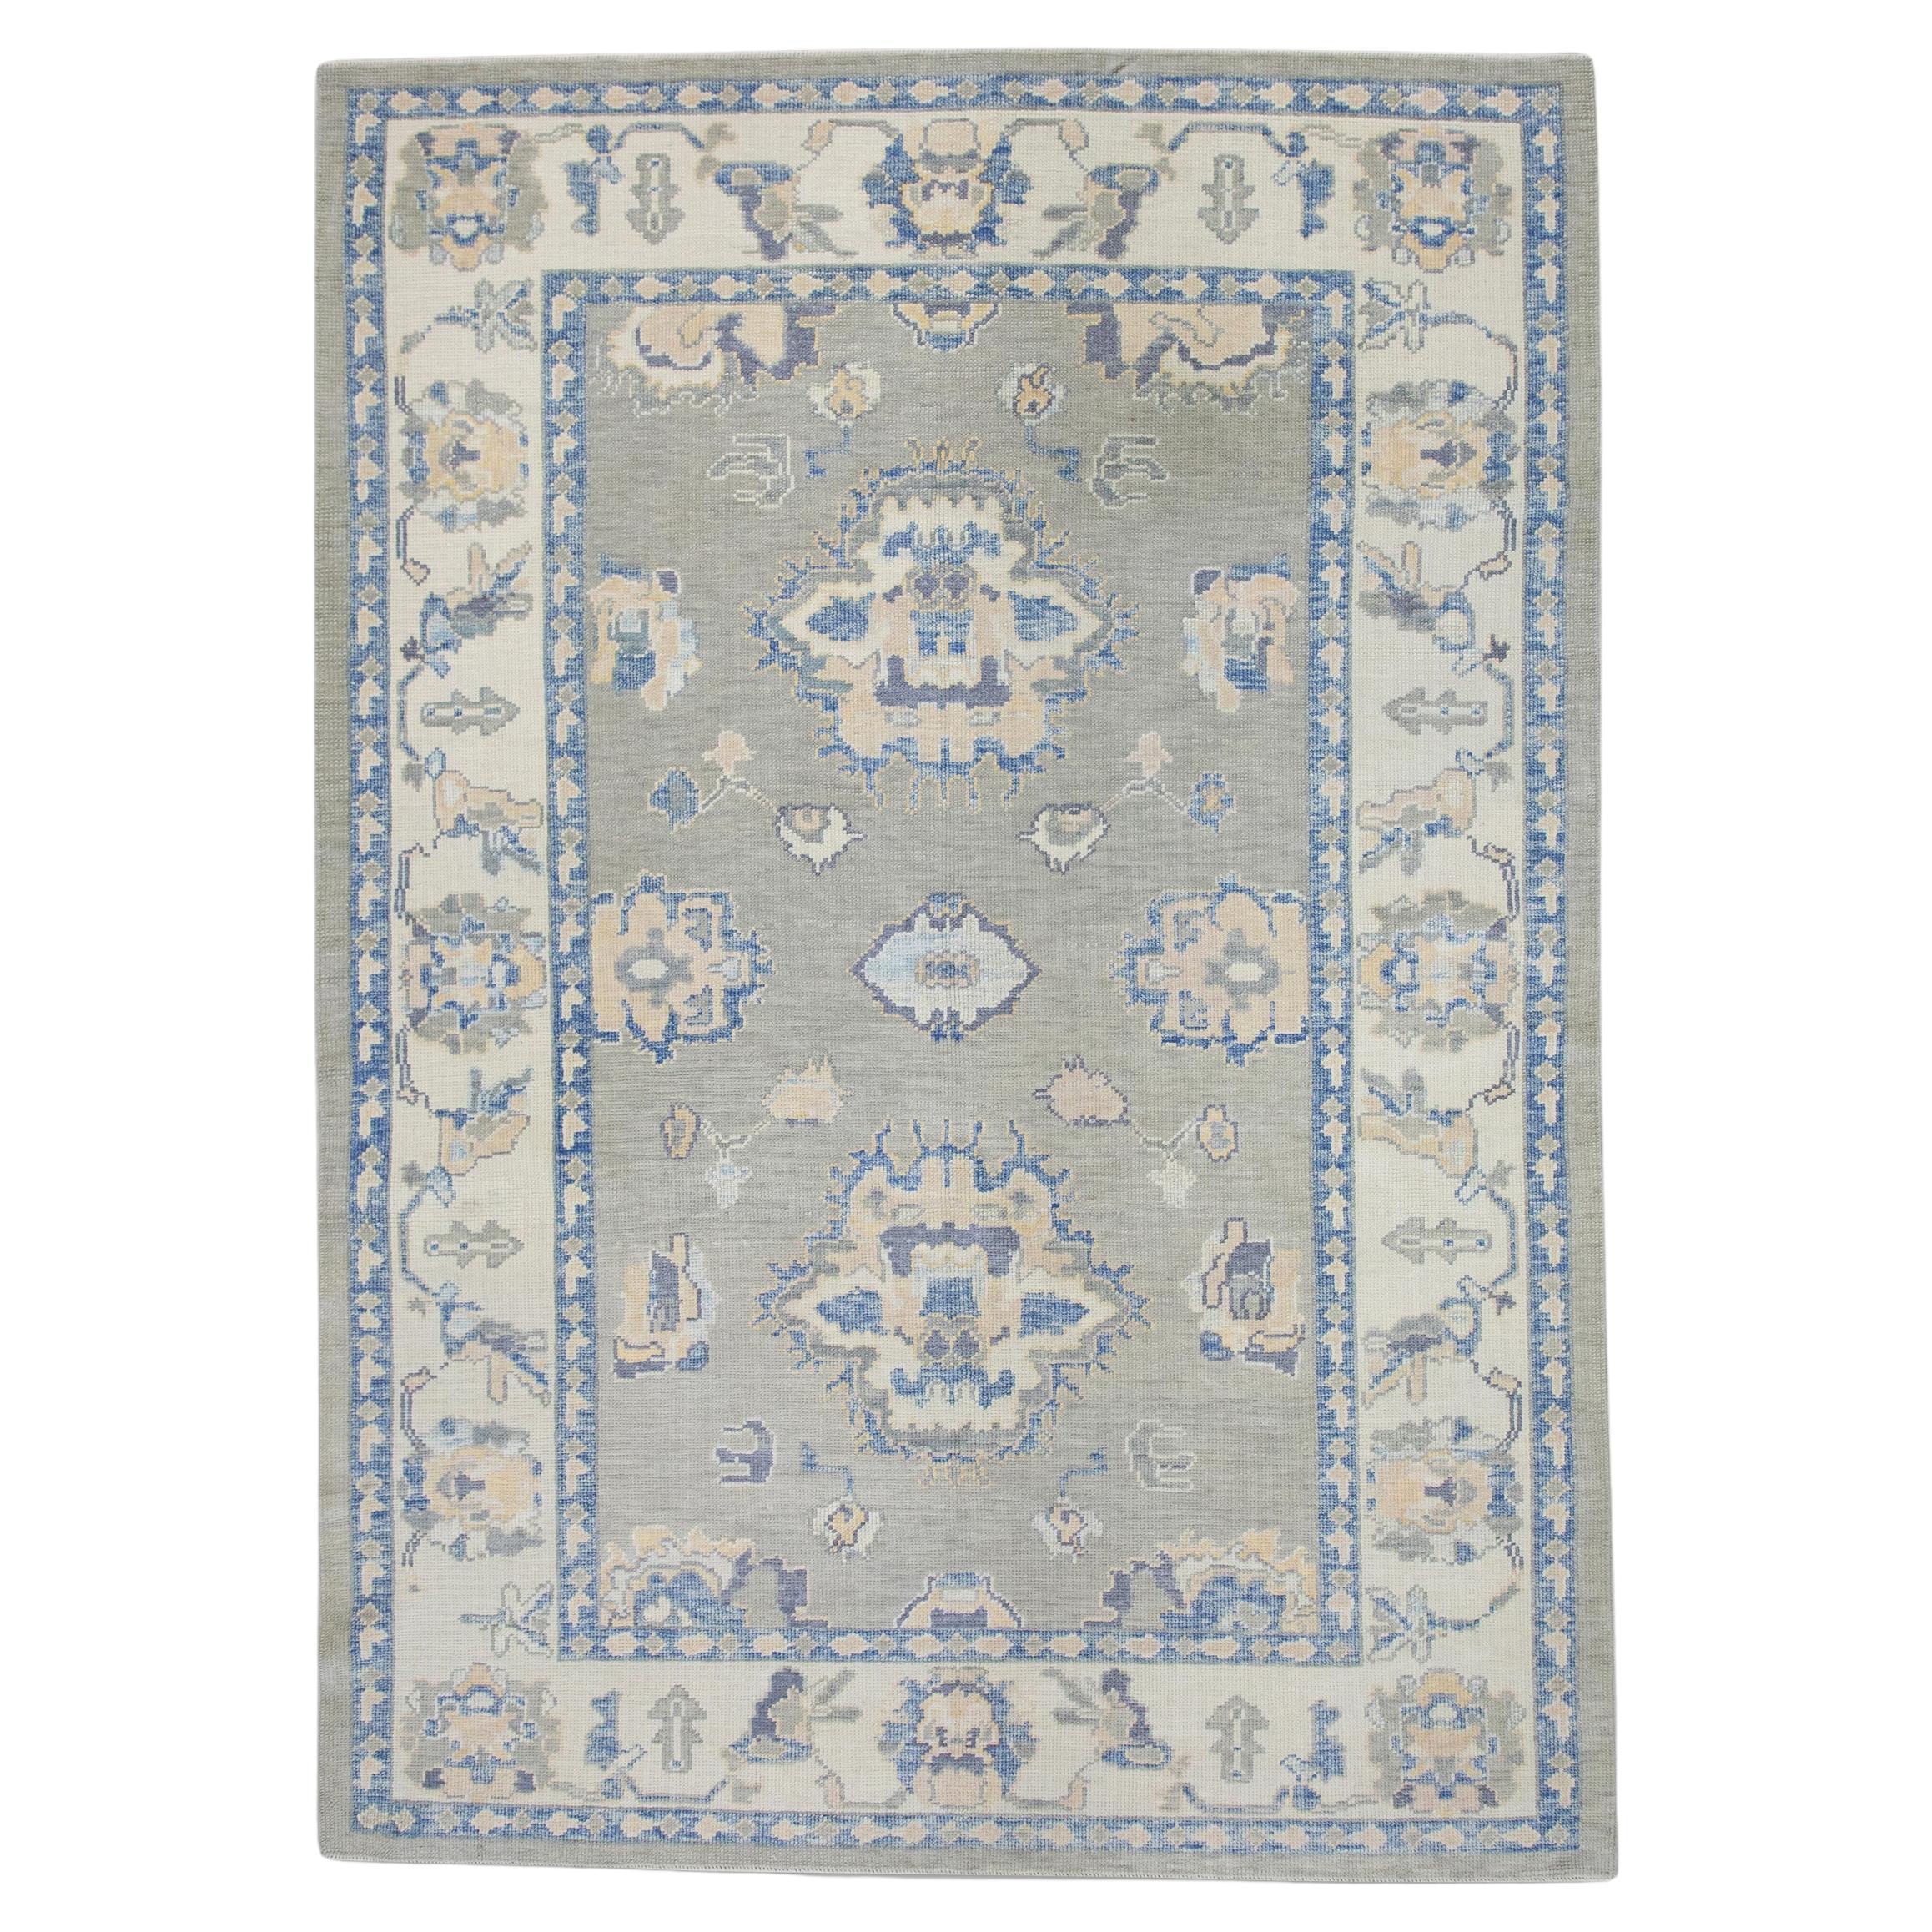 Green and Blue Floral Handwoven Wool Turkish Oushak Rug 6' x 8'4"